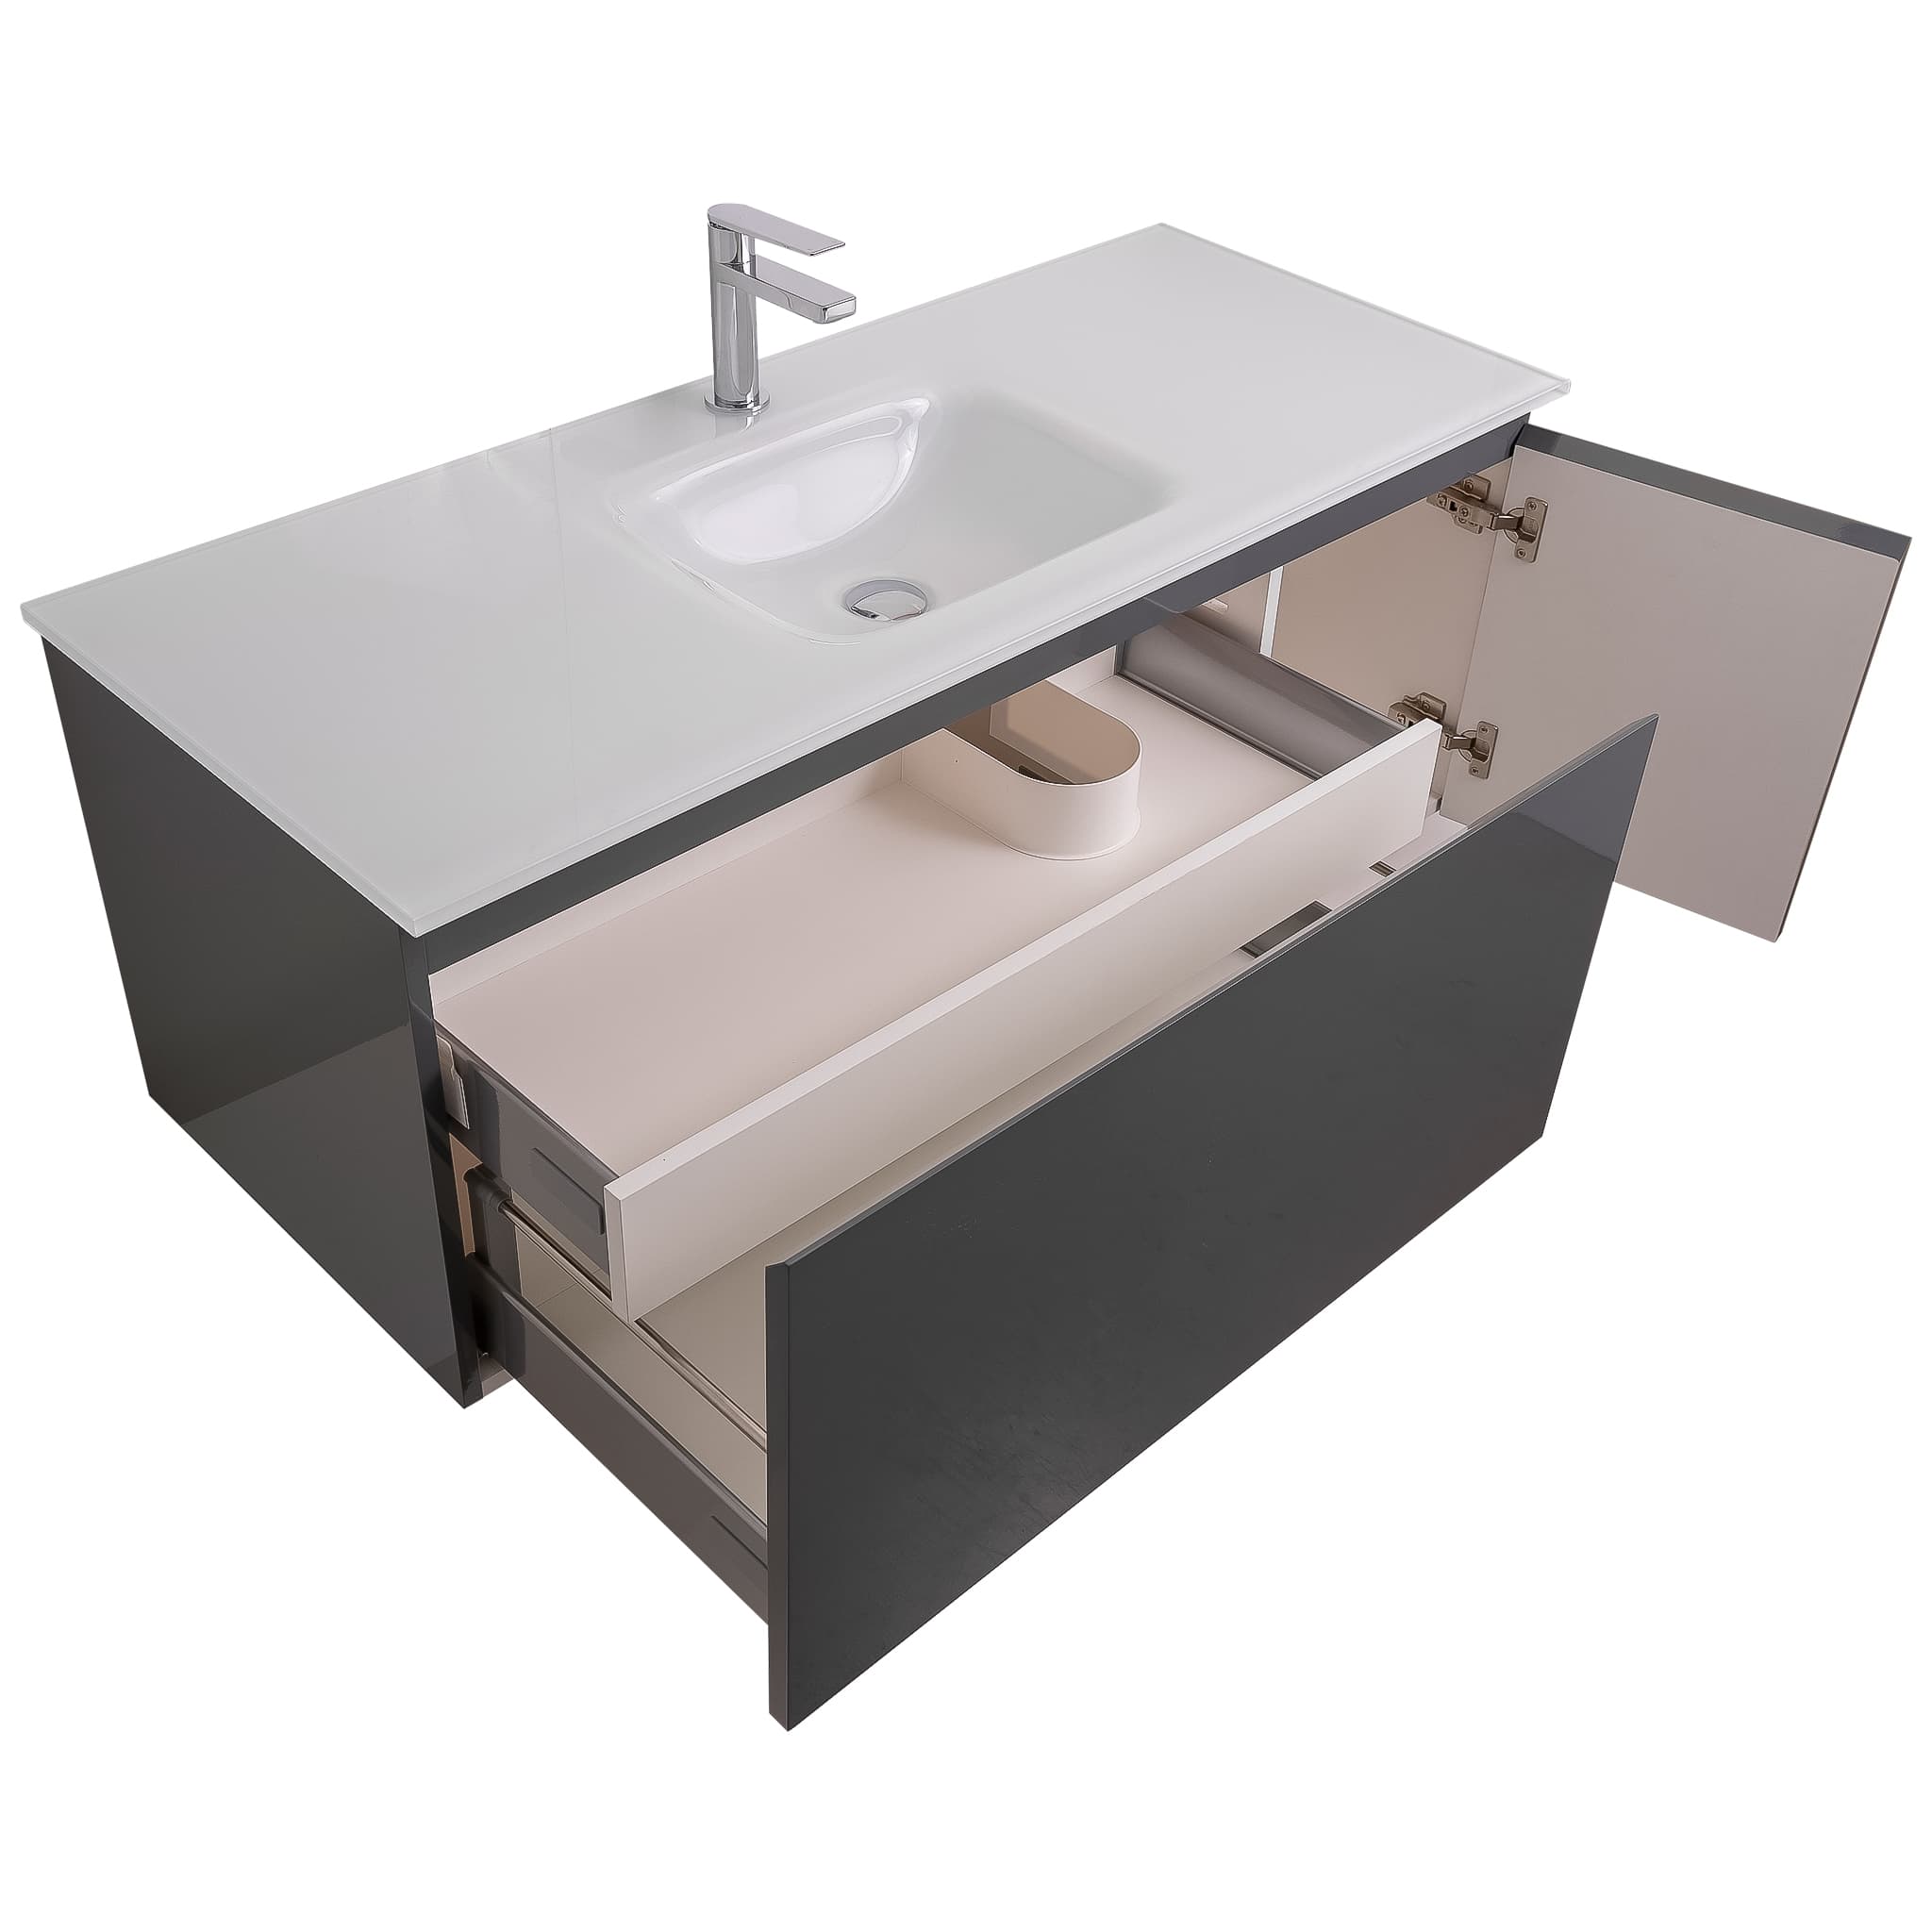 Venice 47.5 Anthracite High Gloss Cabinet, White Tempered Glass Sink, Wall Mounted Modern Vanity Set